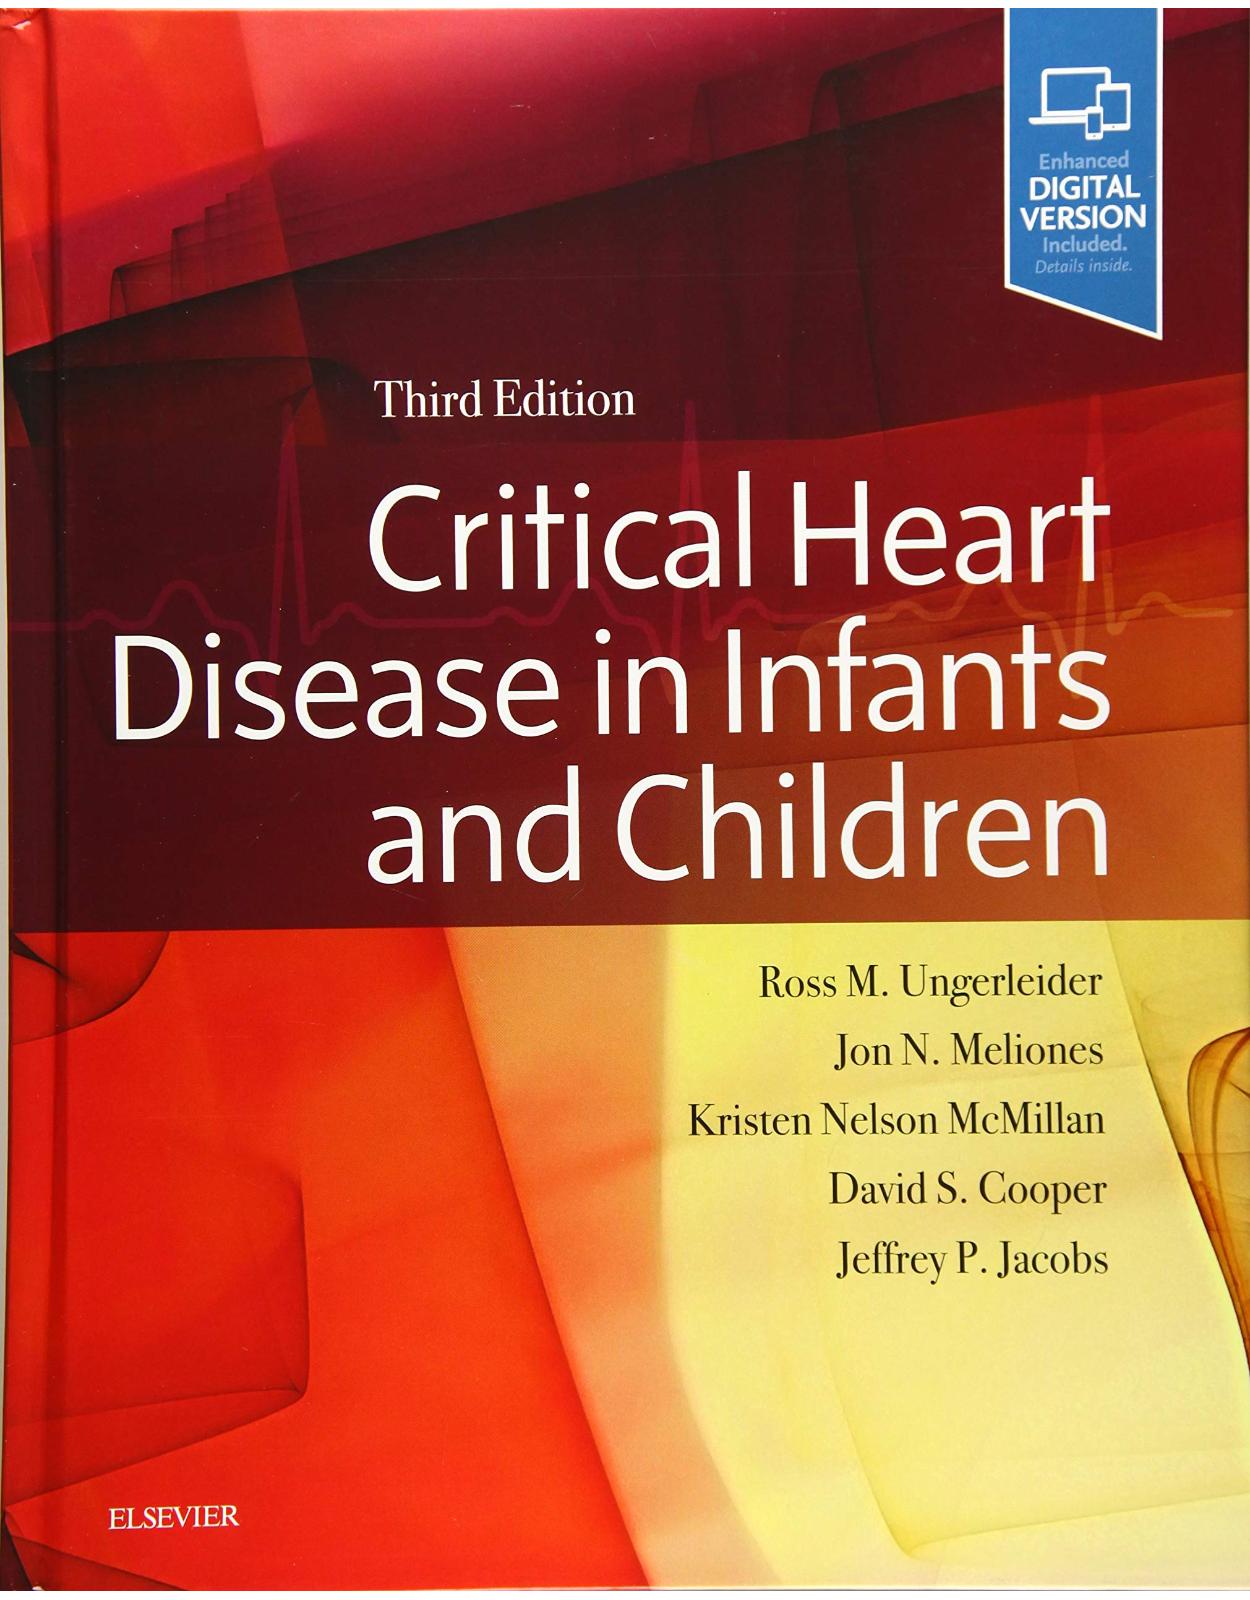 Critical Heart Disease in Infants and Children, 3rd Edition